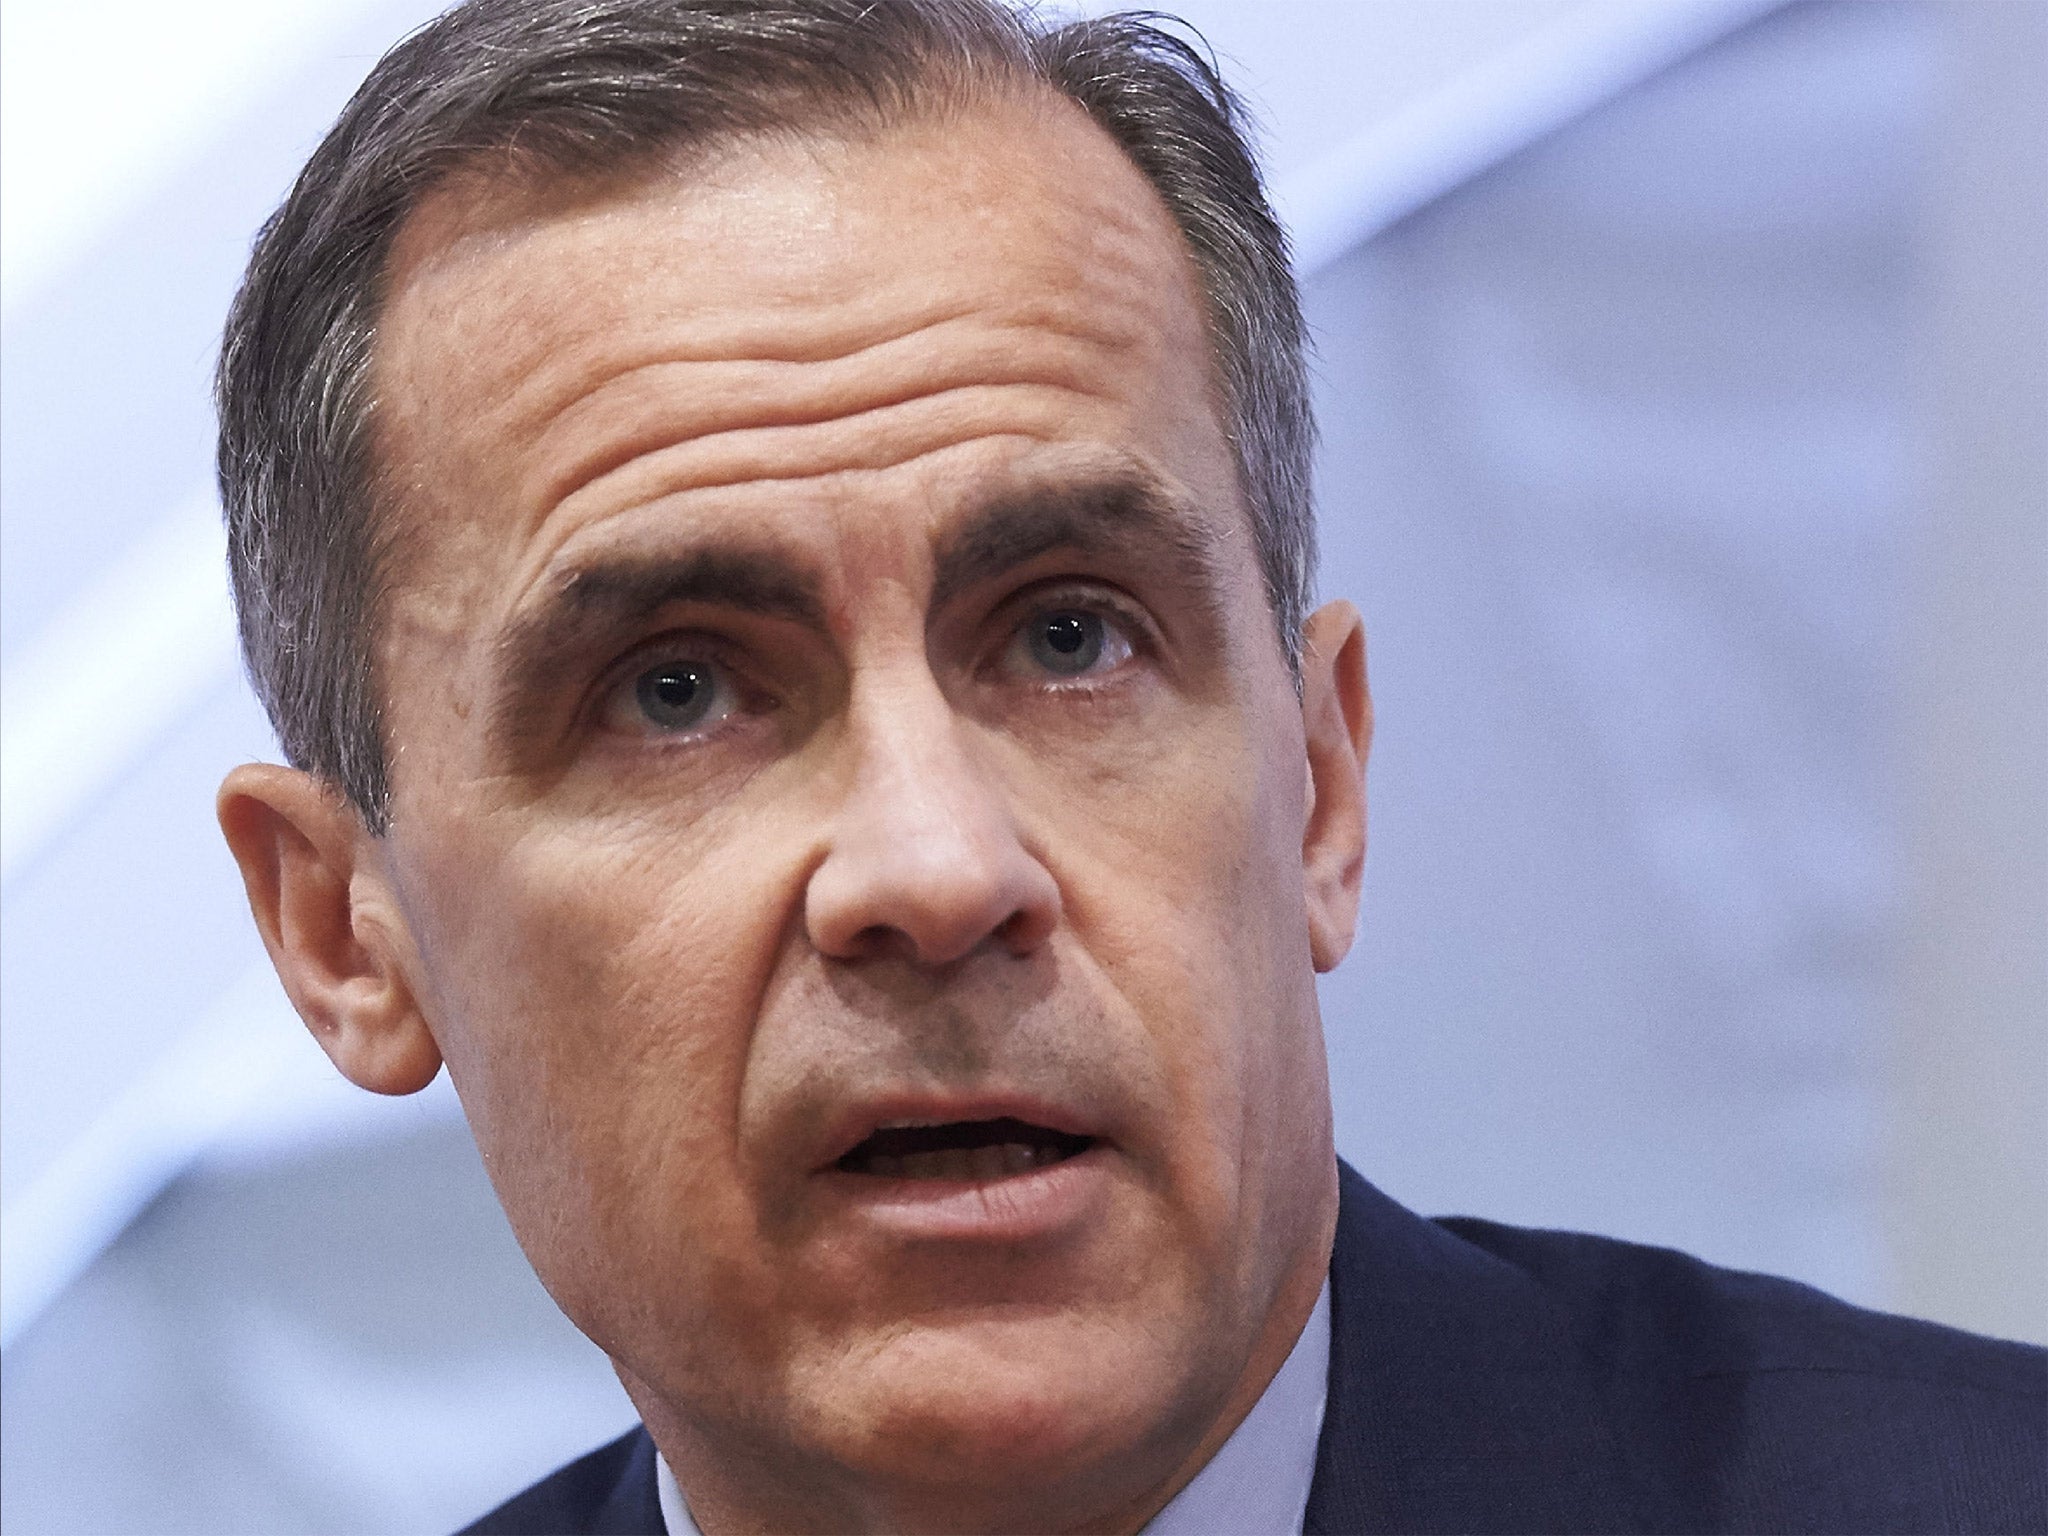 Mark Carney has been accused of taking a pro-EU stance in the Brexit debate.